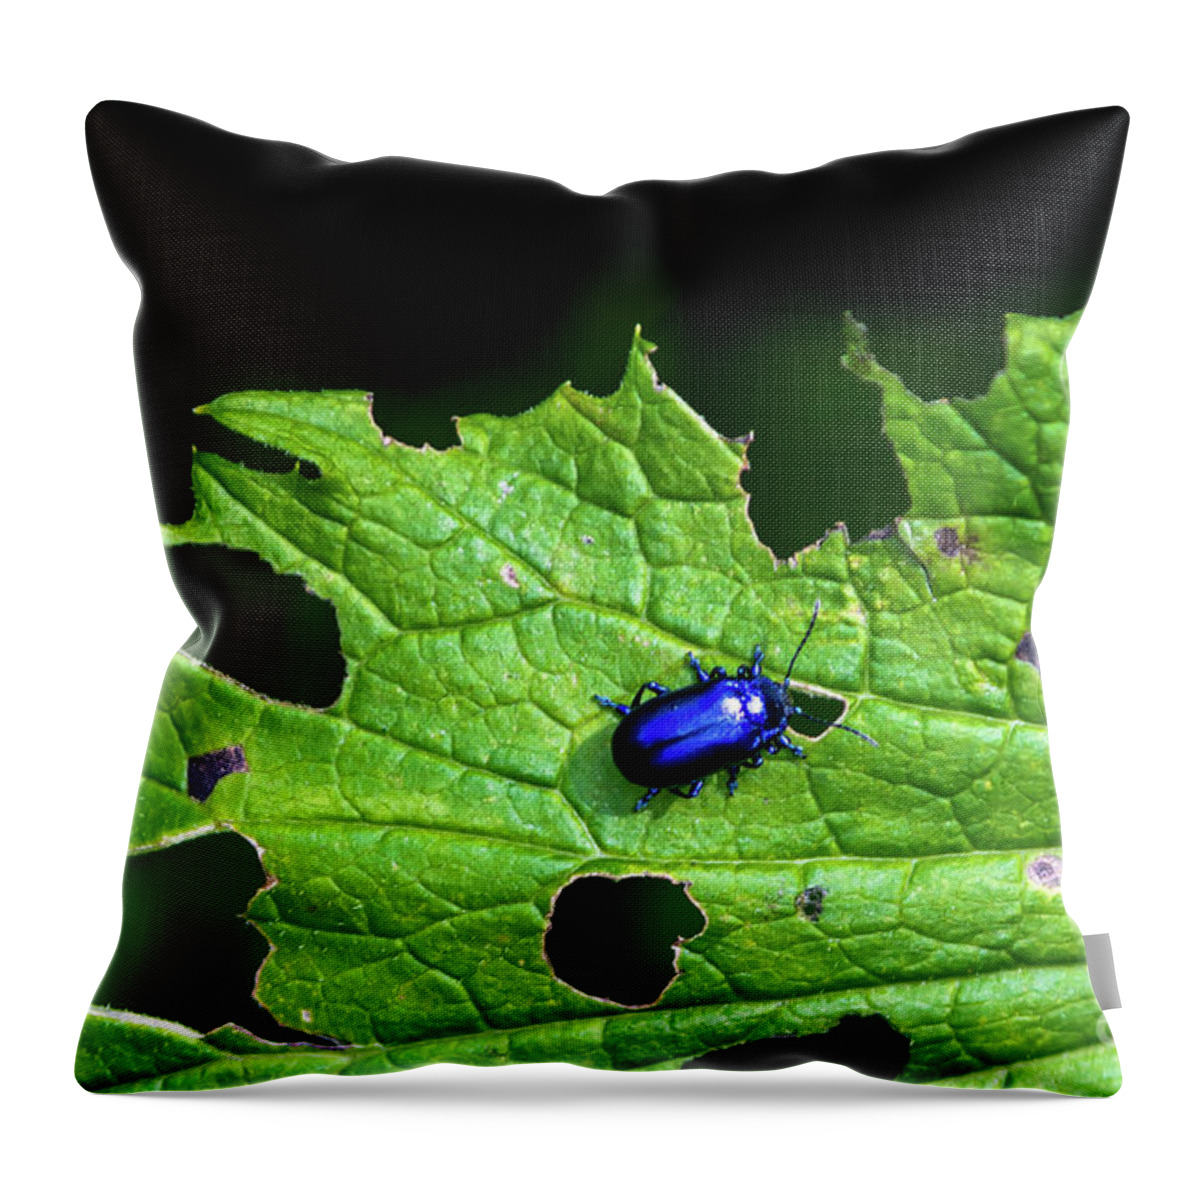 Agriculture Throw Pillow featuring the photograph Metallic Blue Leaf Beetle On Green Leaf With Holes by Andreas Berthold